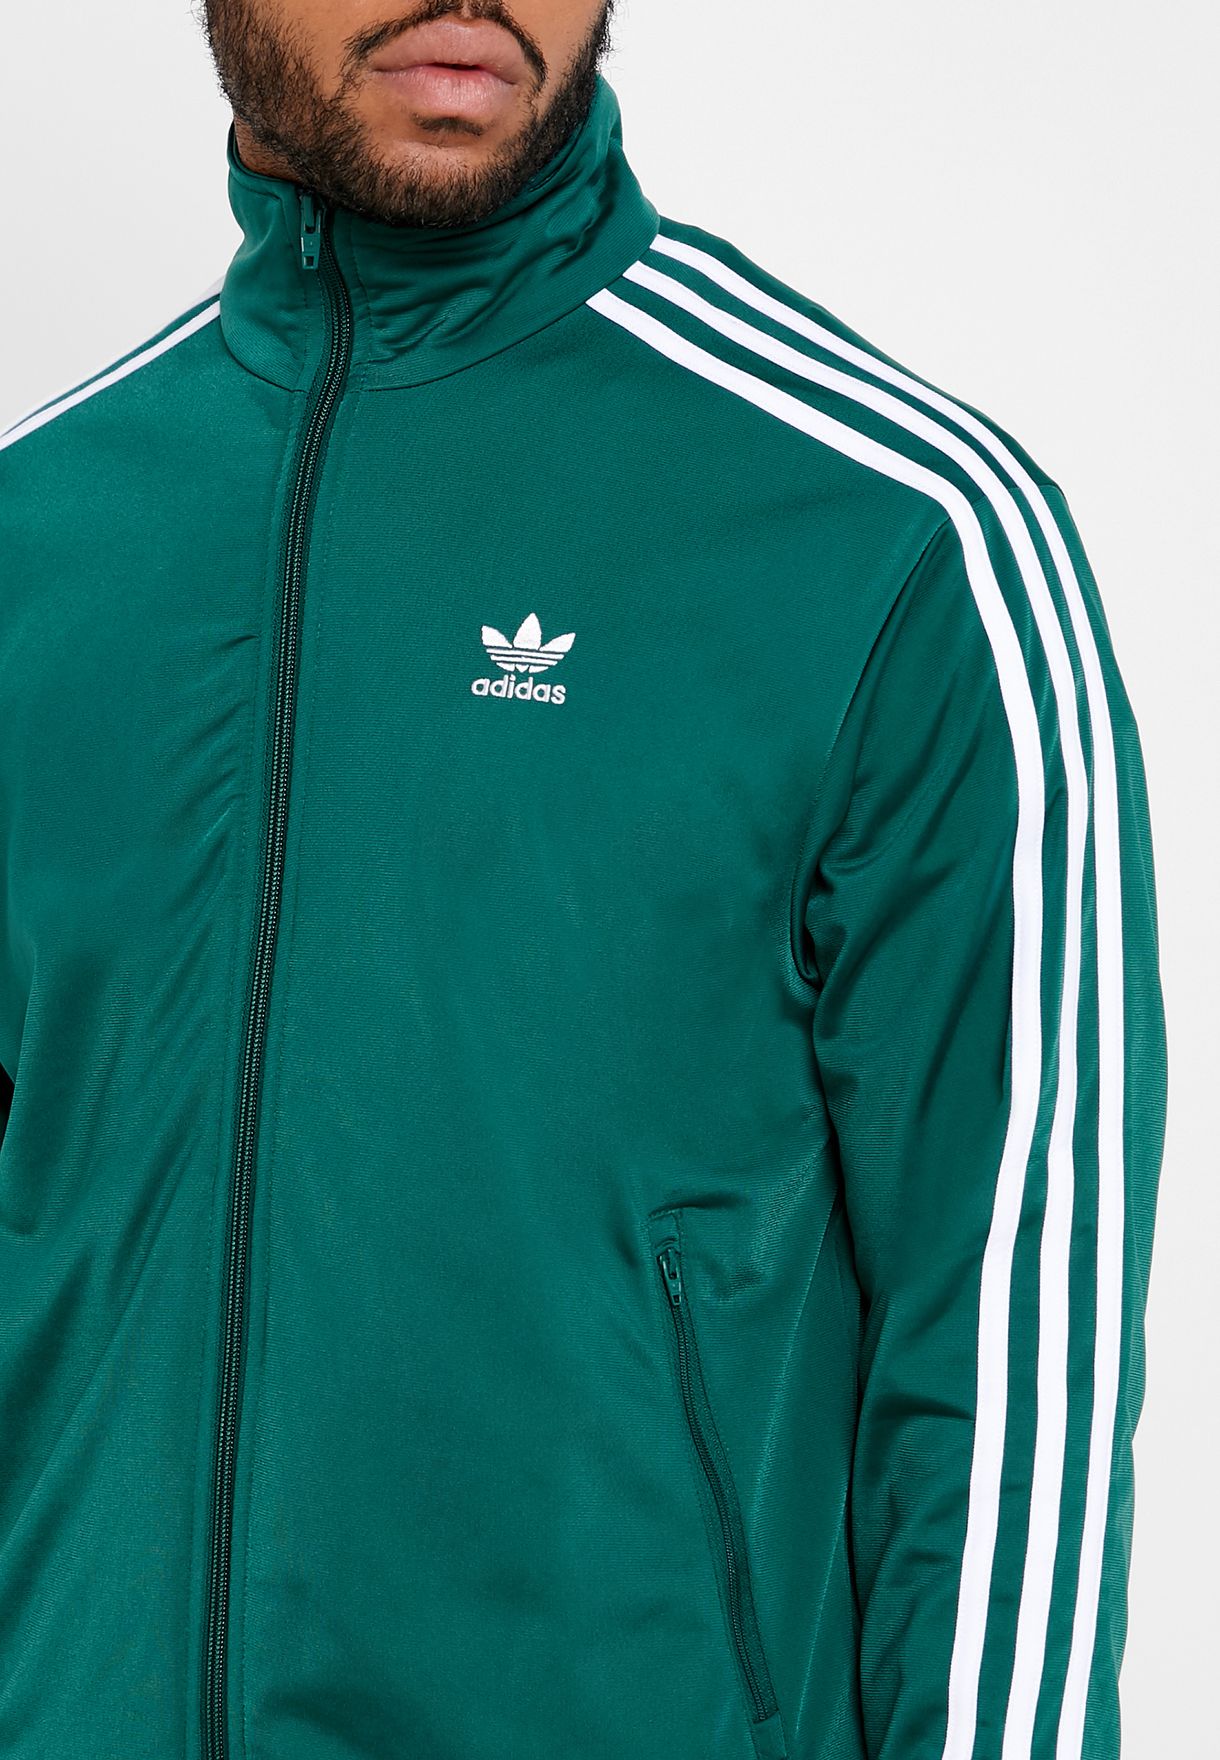 Buy > green adidas track jacket mens > in stock